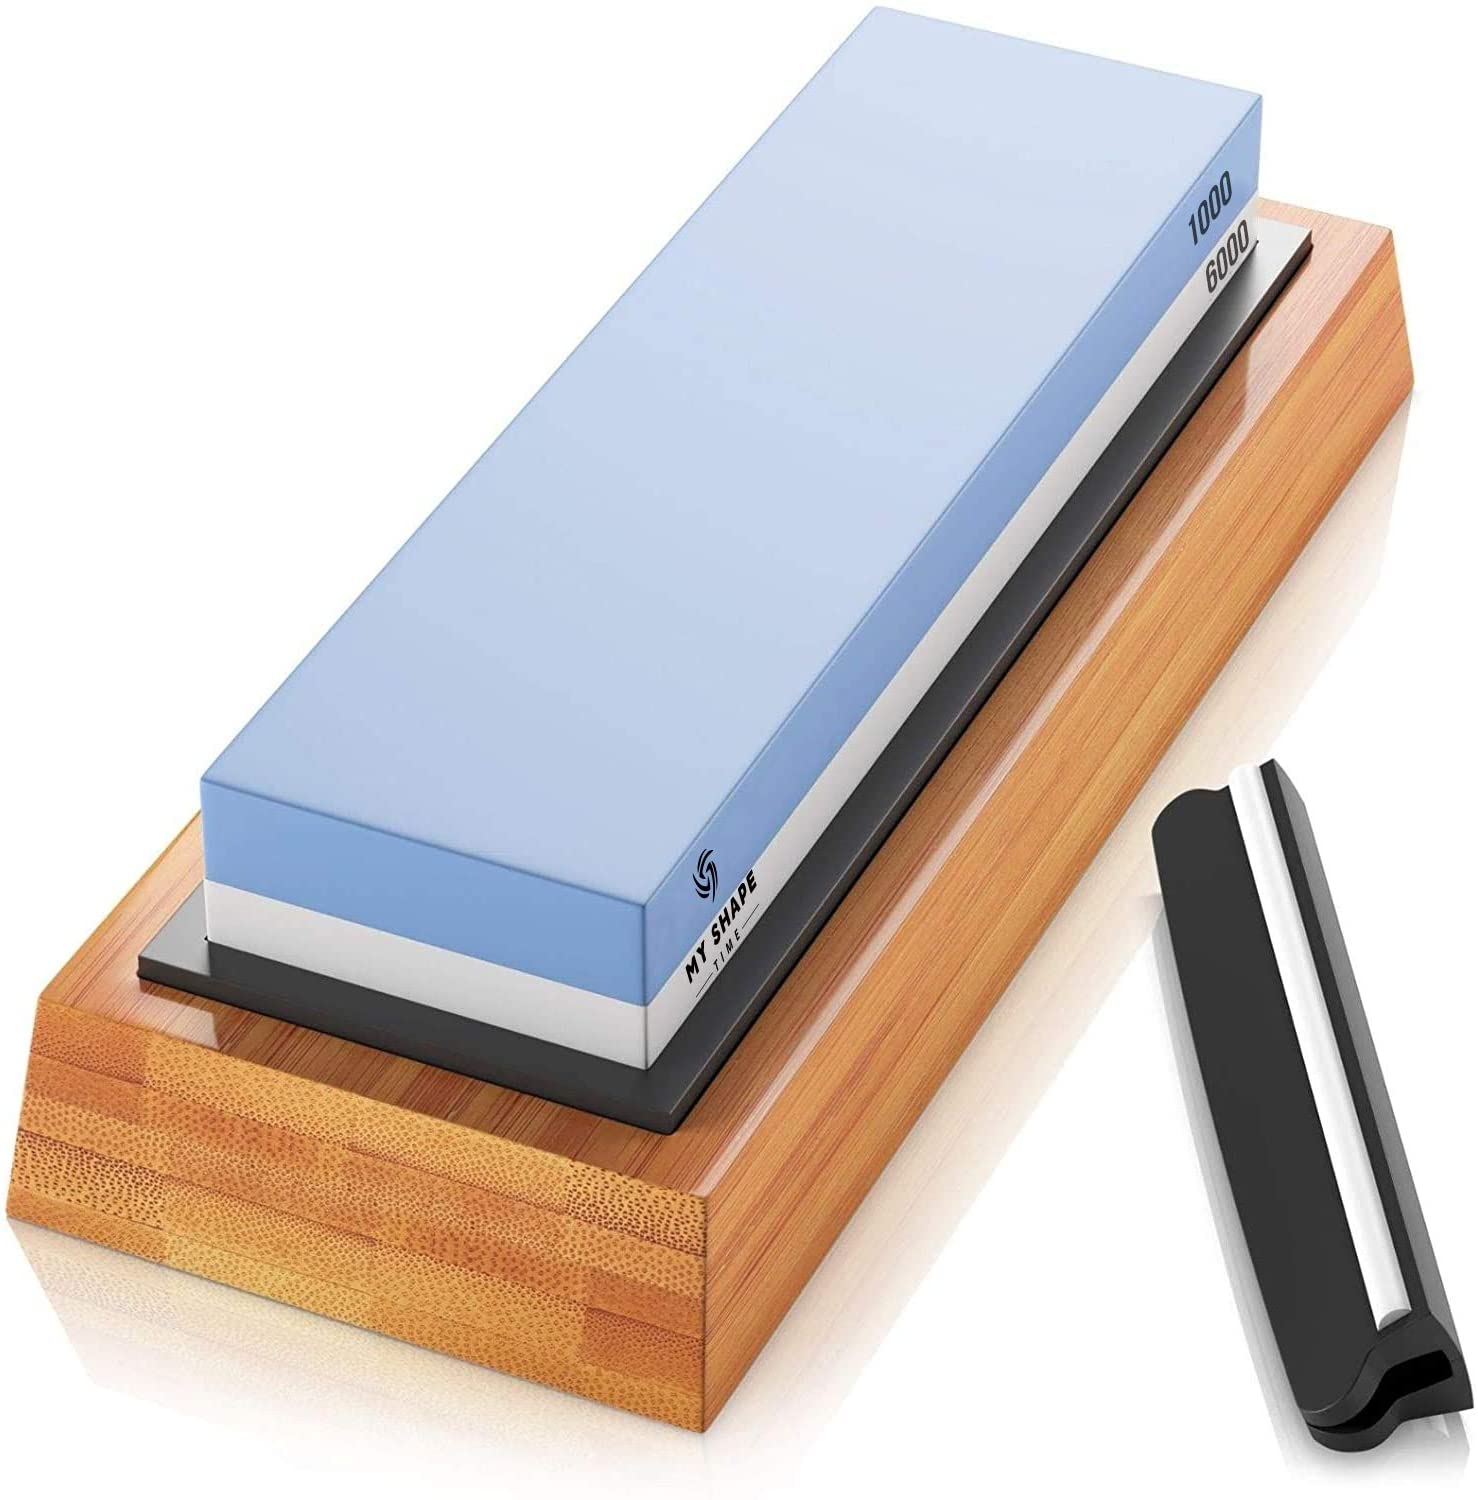 How to Use a Knife Sharpening Stone